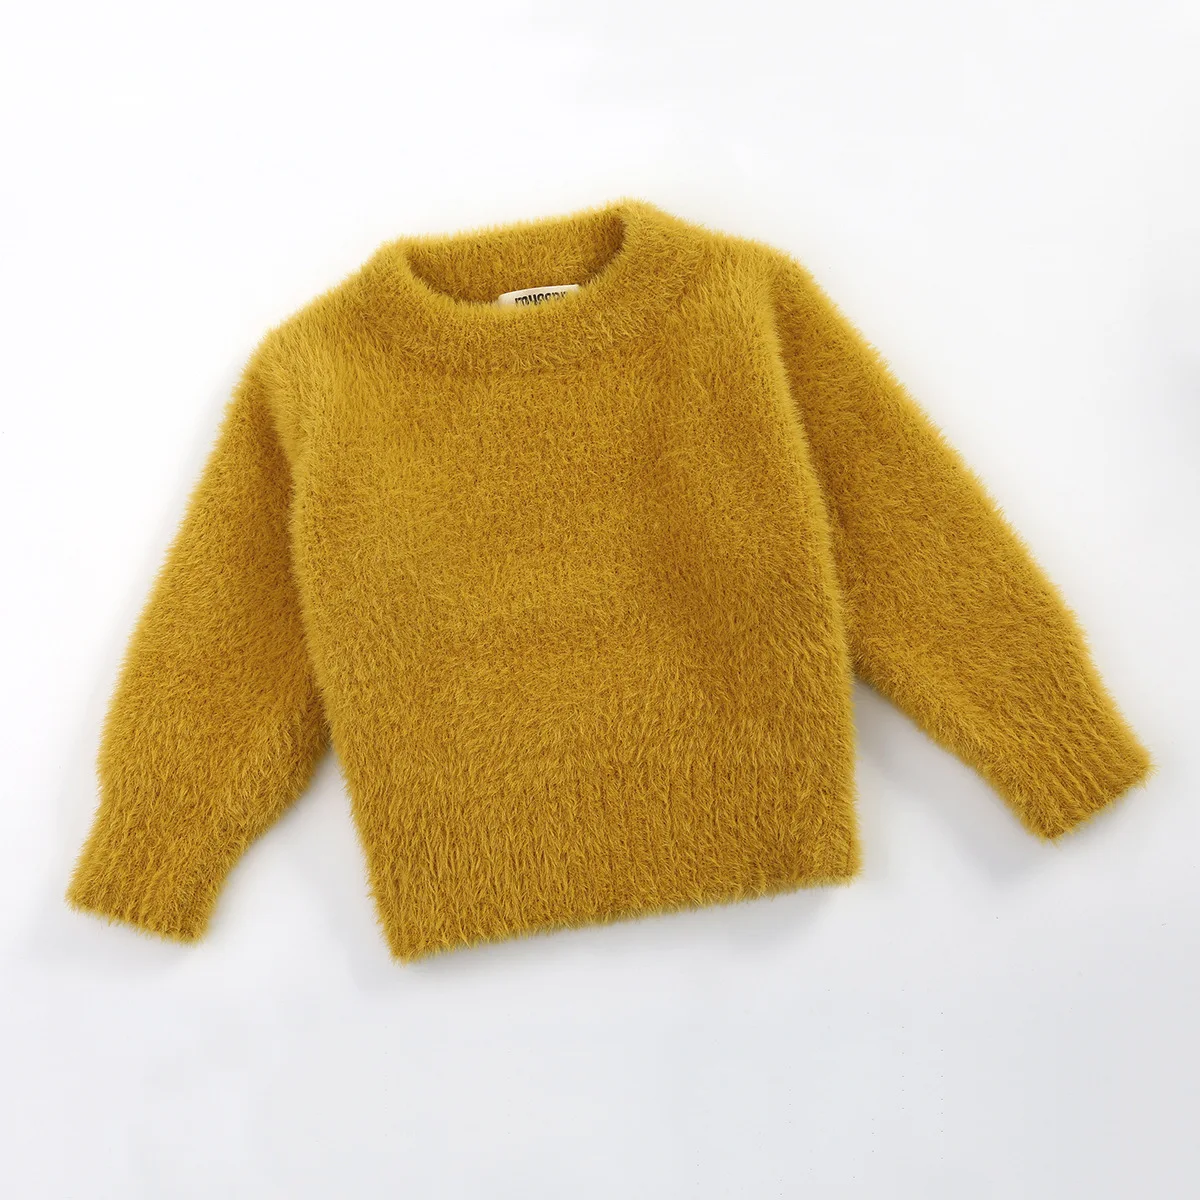 Winter Knit Pullover Sweater Children sweatershirts Long Sleeve Wool Sweaters for Girls Baby Boy Clothes Toddler Sportswear